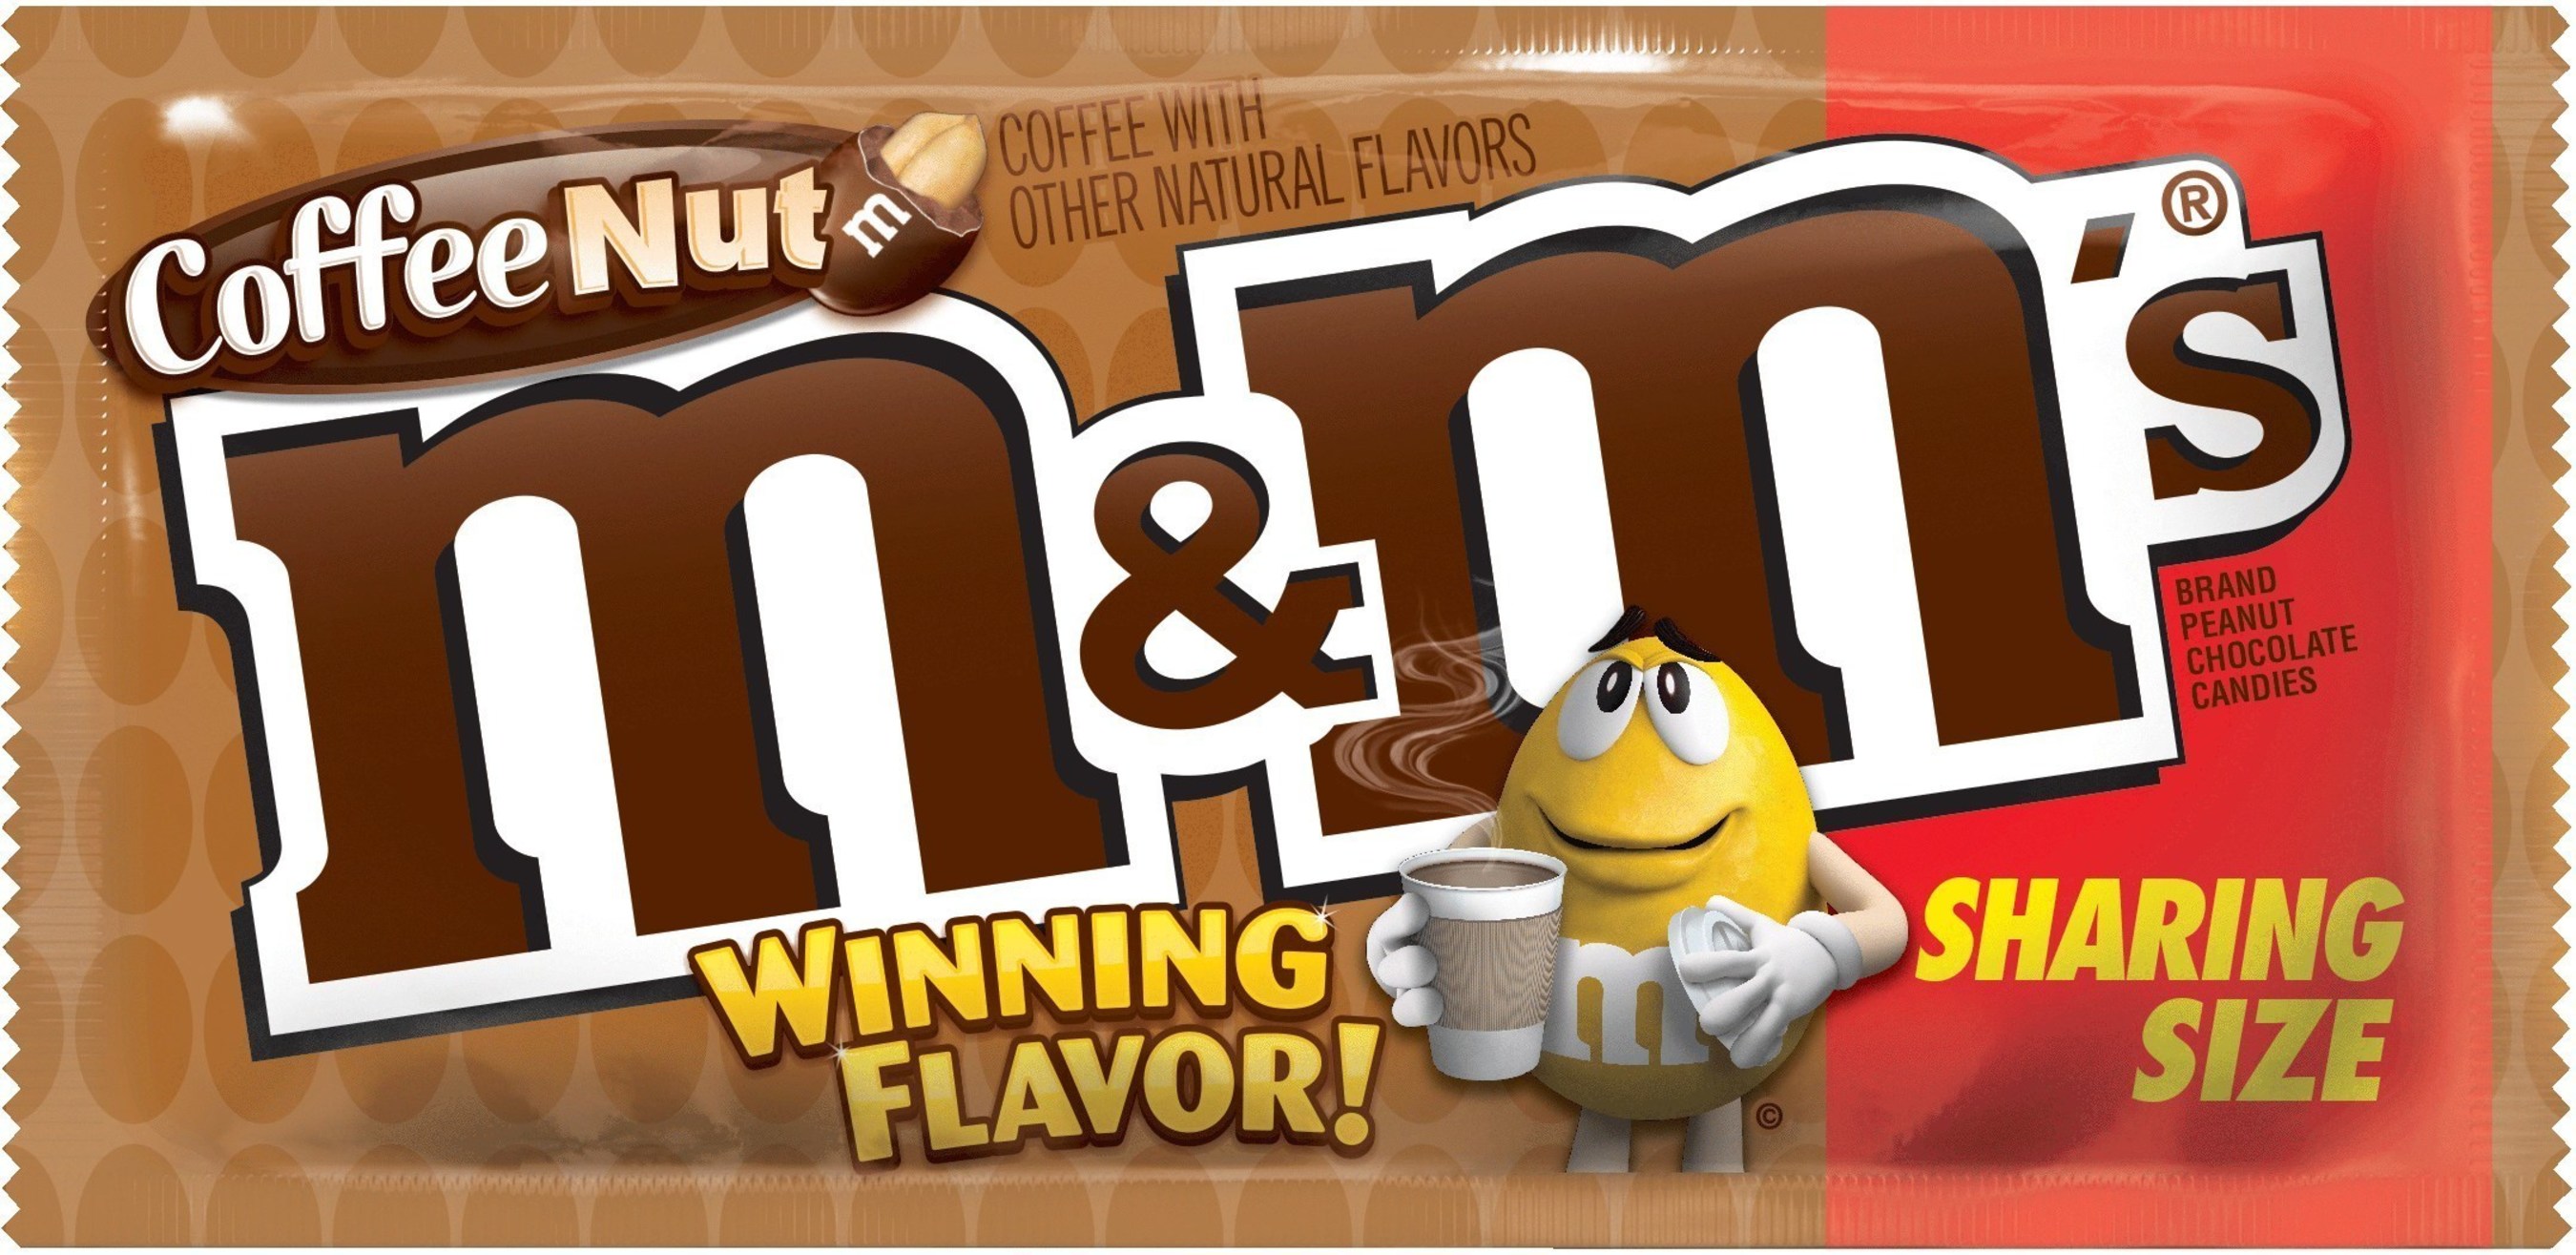 In honor of the brand's 75th anniversary, M&M'S asked fans to choose the brand's newest peanut-flavored addition to join Original Peanut on shelves.  With more than one million votes cast, M&M'S is proud to announce Coffee Nut as the flavor loved most! Fans can purchase M&M'S Coffee Nut at retailers nationwide in early August.